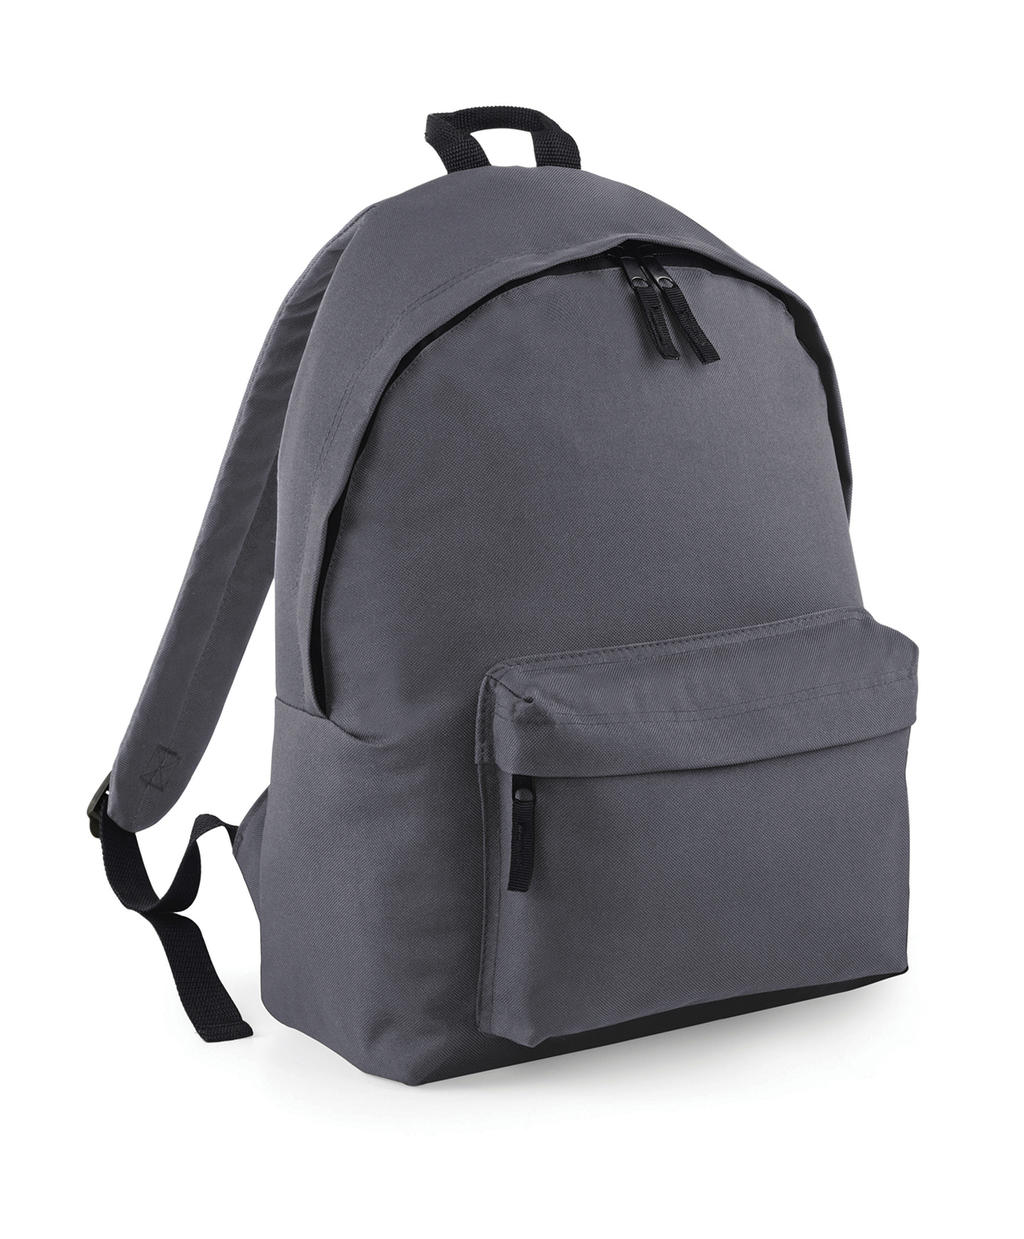  Maxi Fashion Backpack in Farbe Graphite Grey